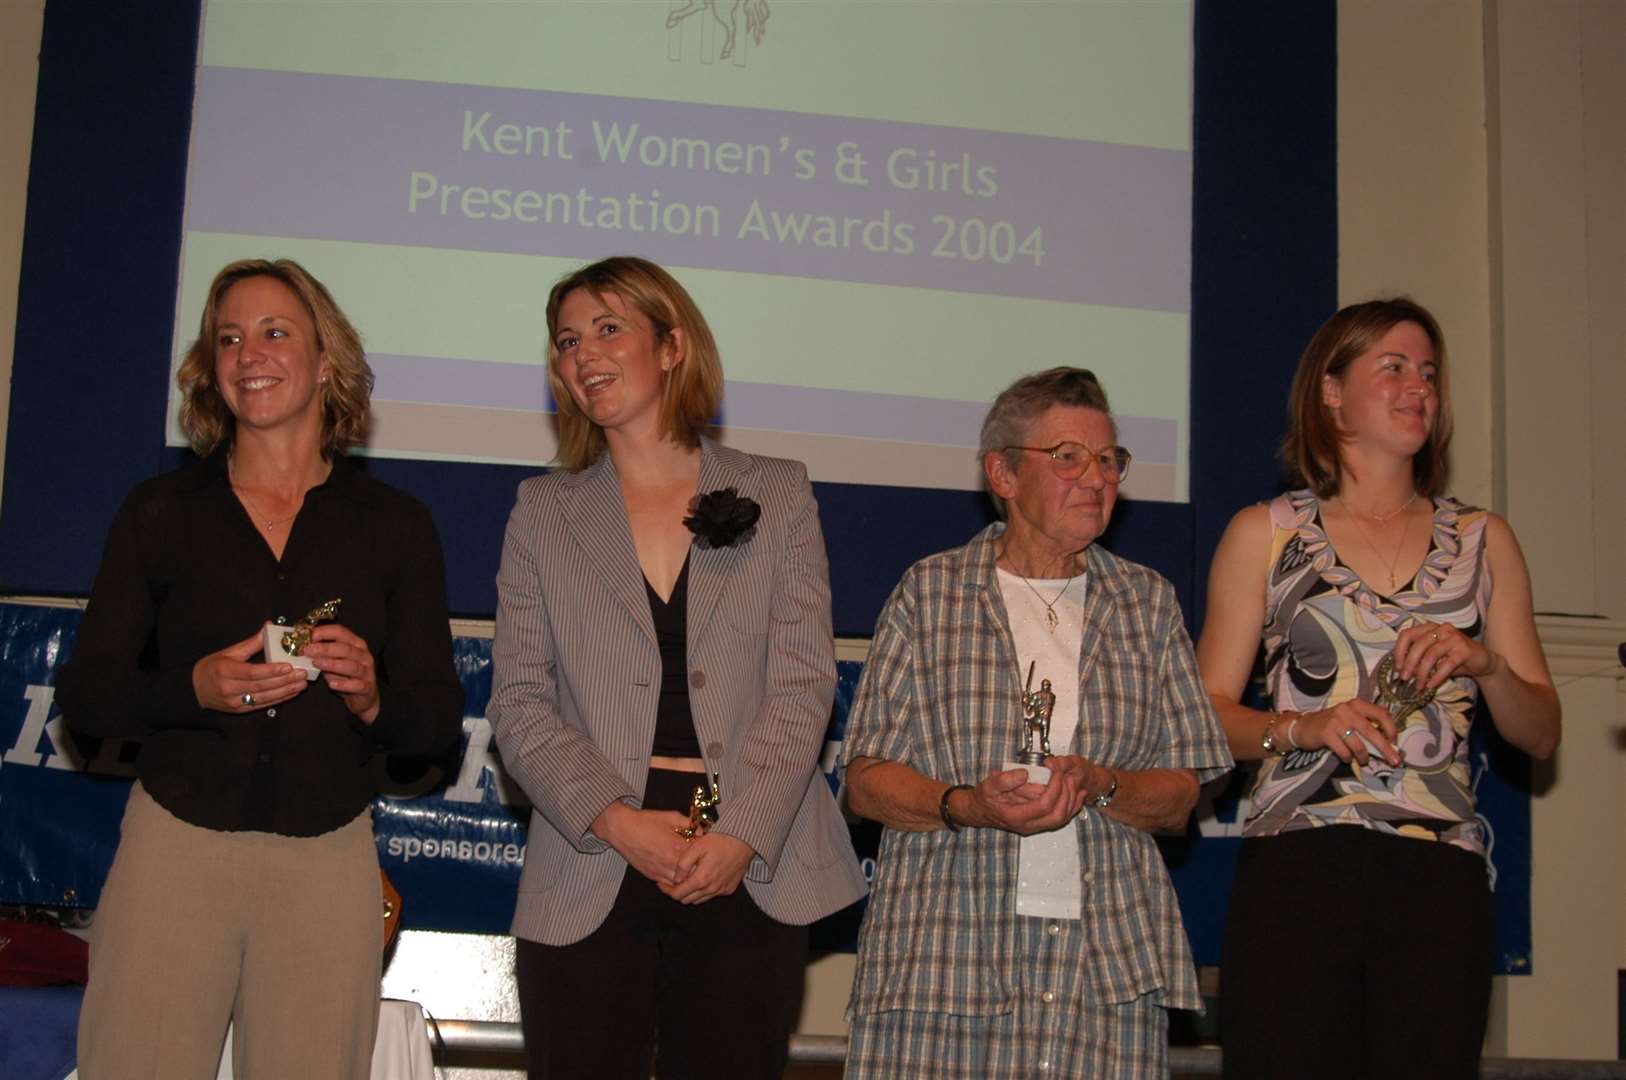 Cecilia Robinson, second from the right, pictured alongside Clare Connor, Charlotte Edwards and Lydia Greenway at a Kent Women's awards dinner in 2004. Picture: Bipin Patel